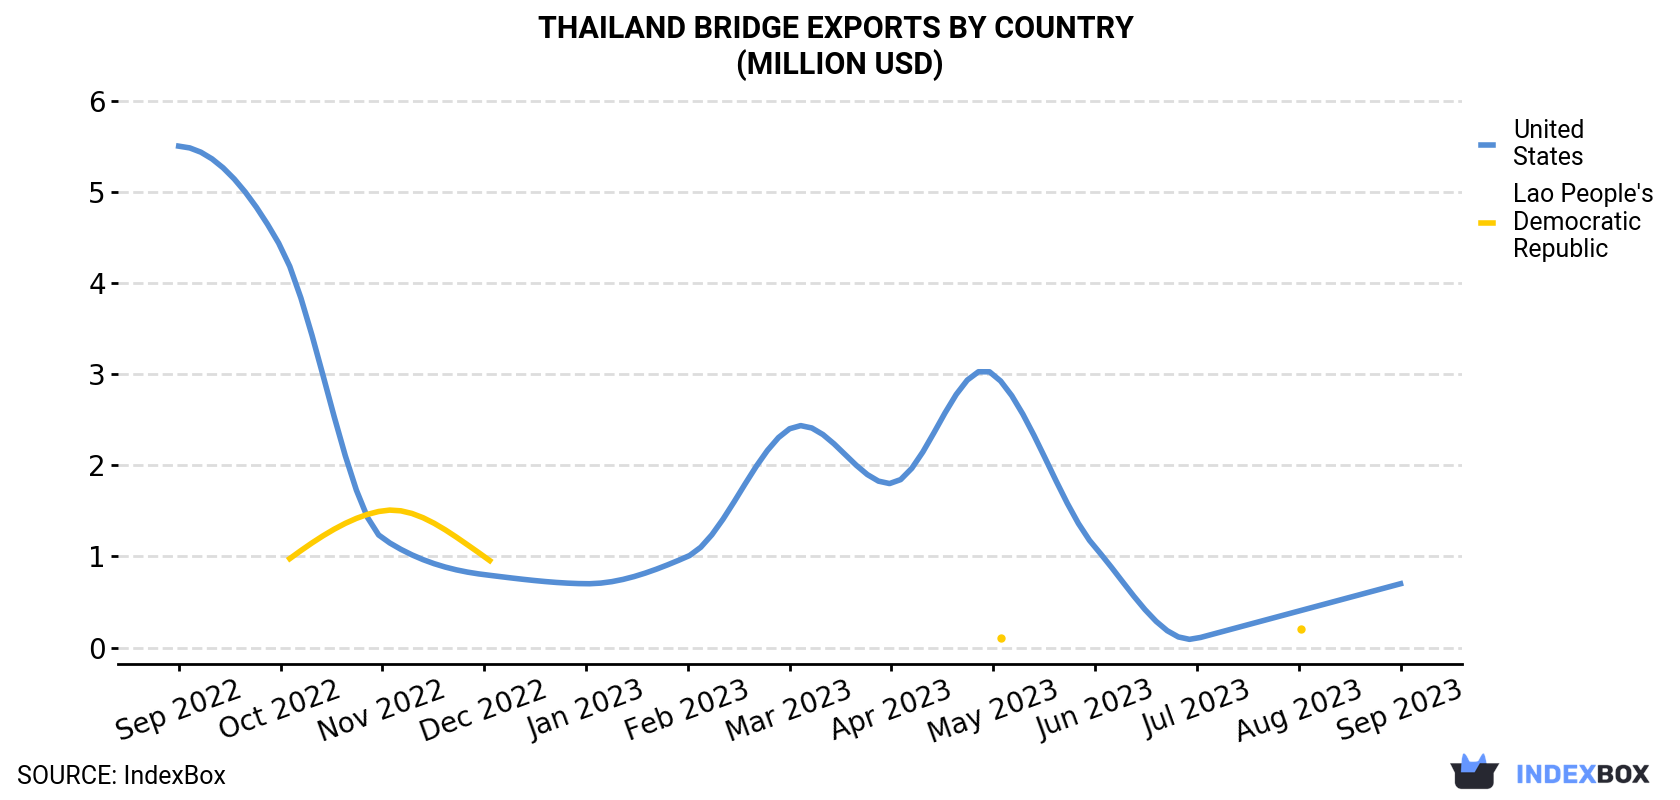 Thailand Bridge Exports By Country (Million USD)